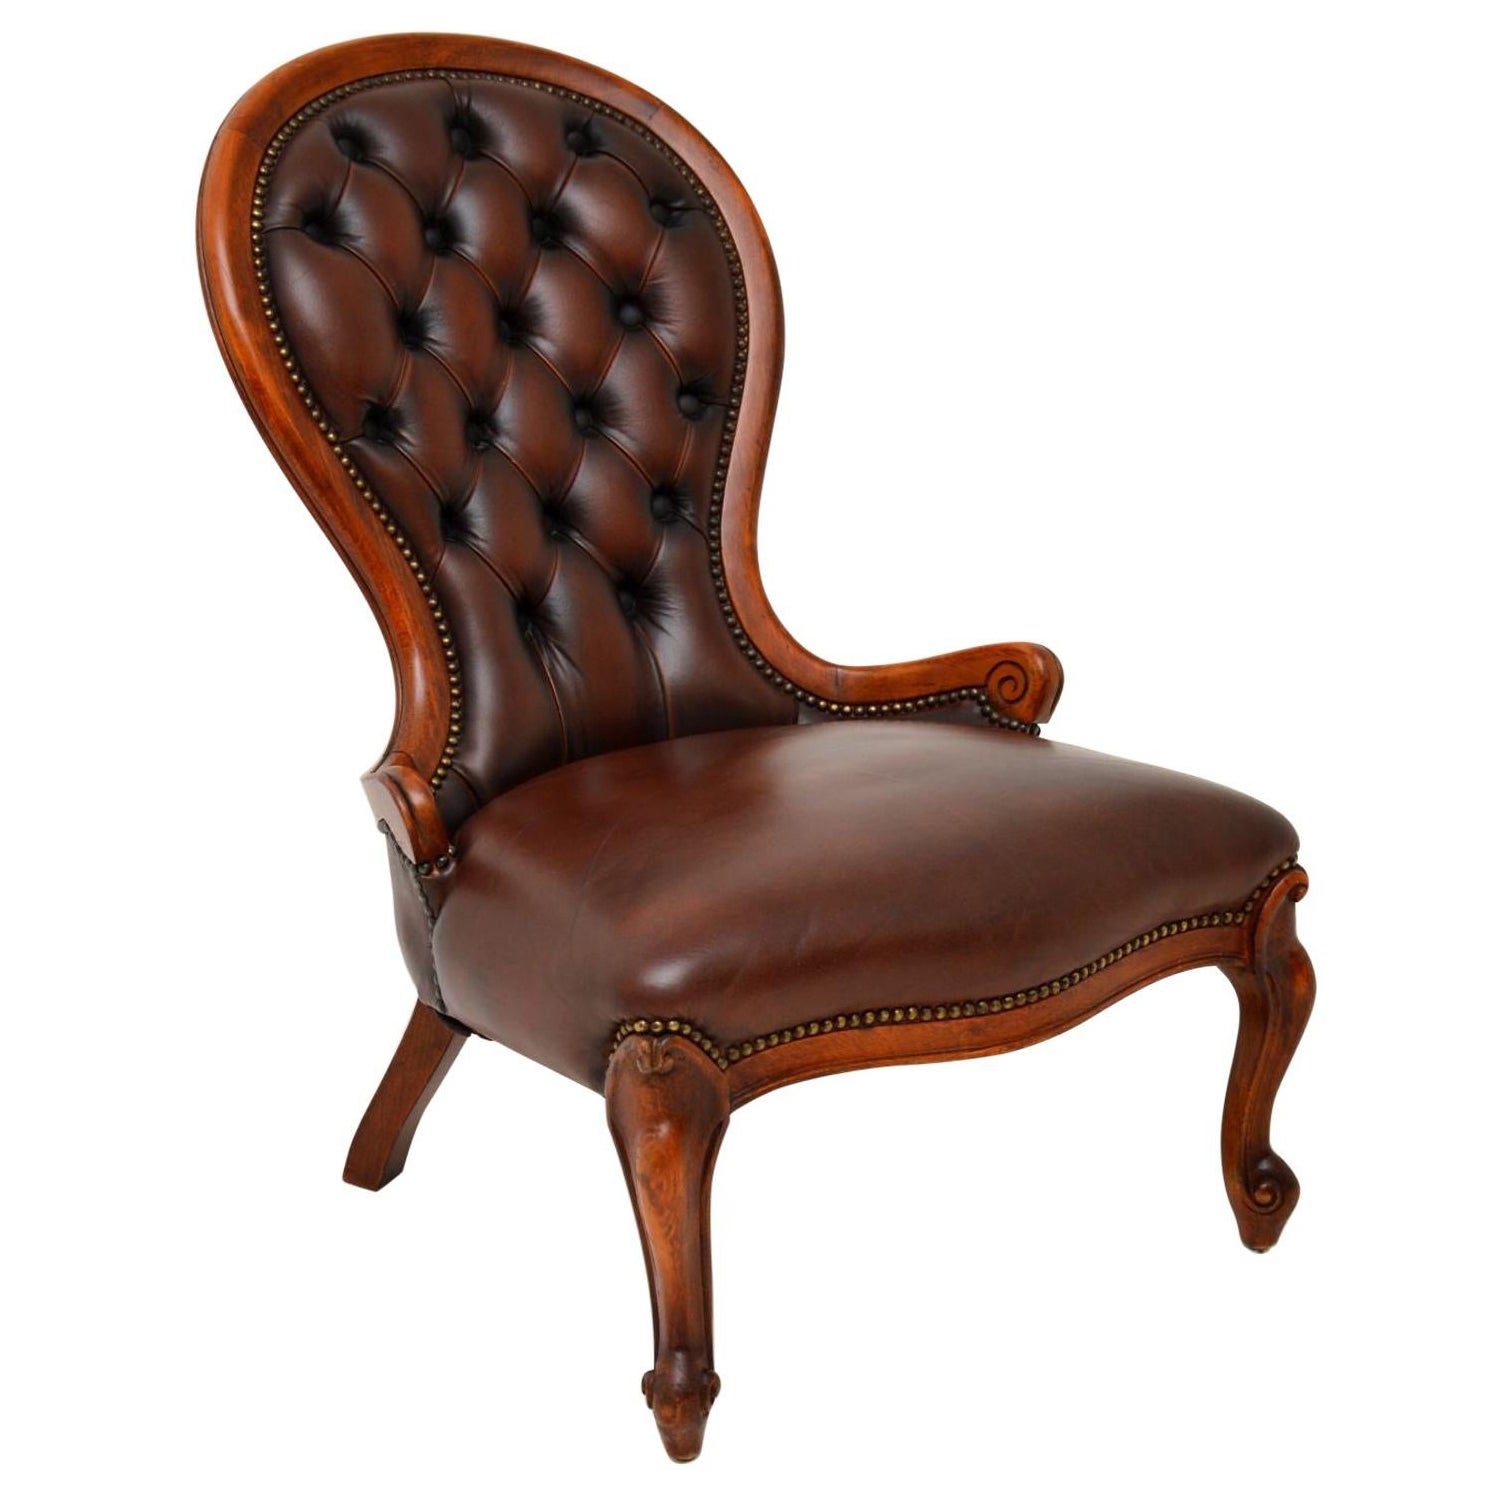 Antique Victorian Style Leather Spoon Back Chair